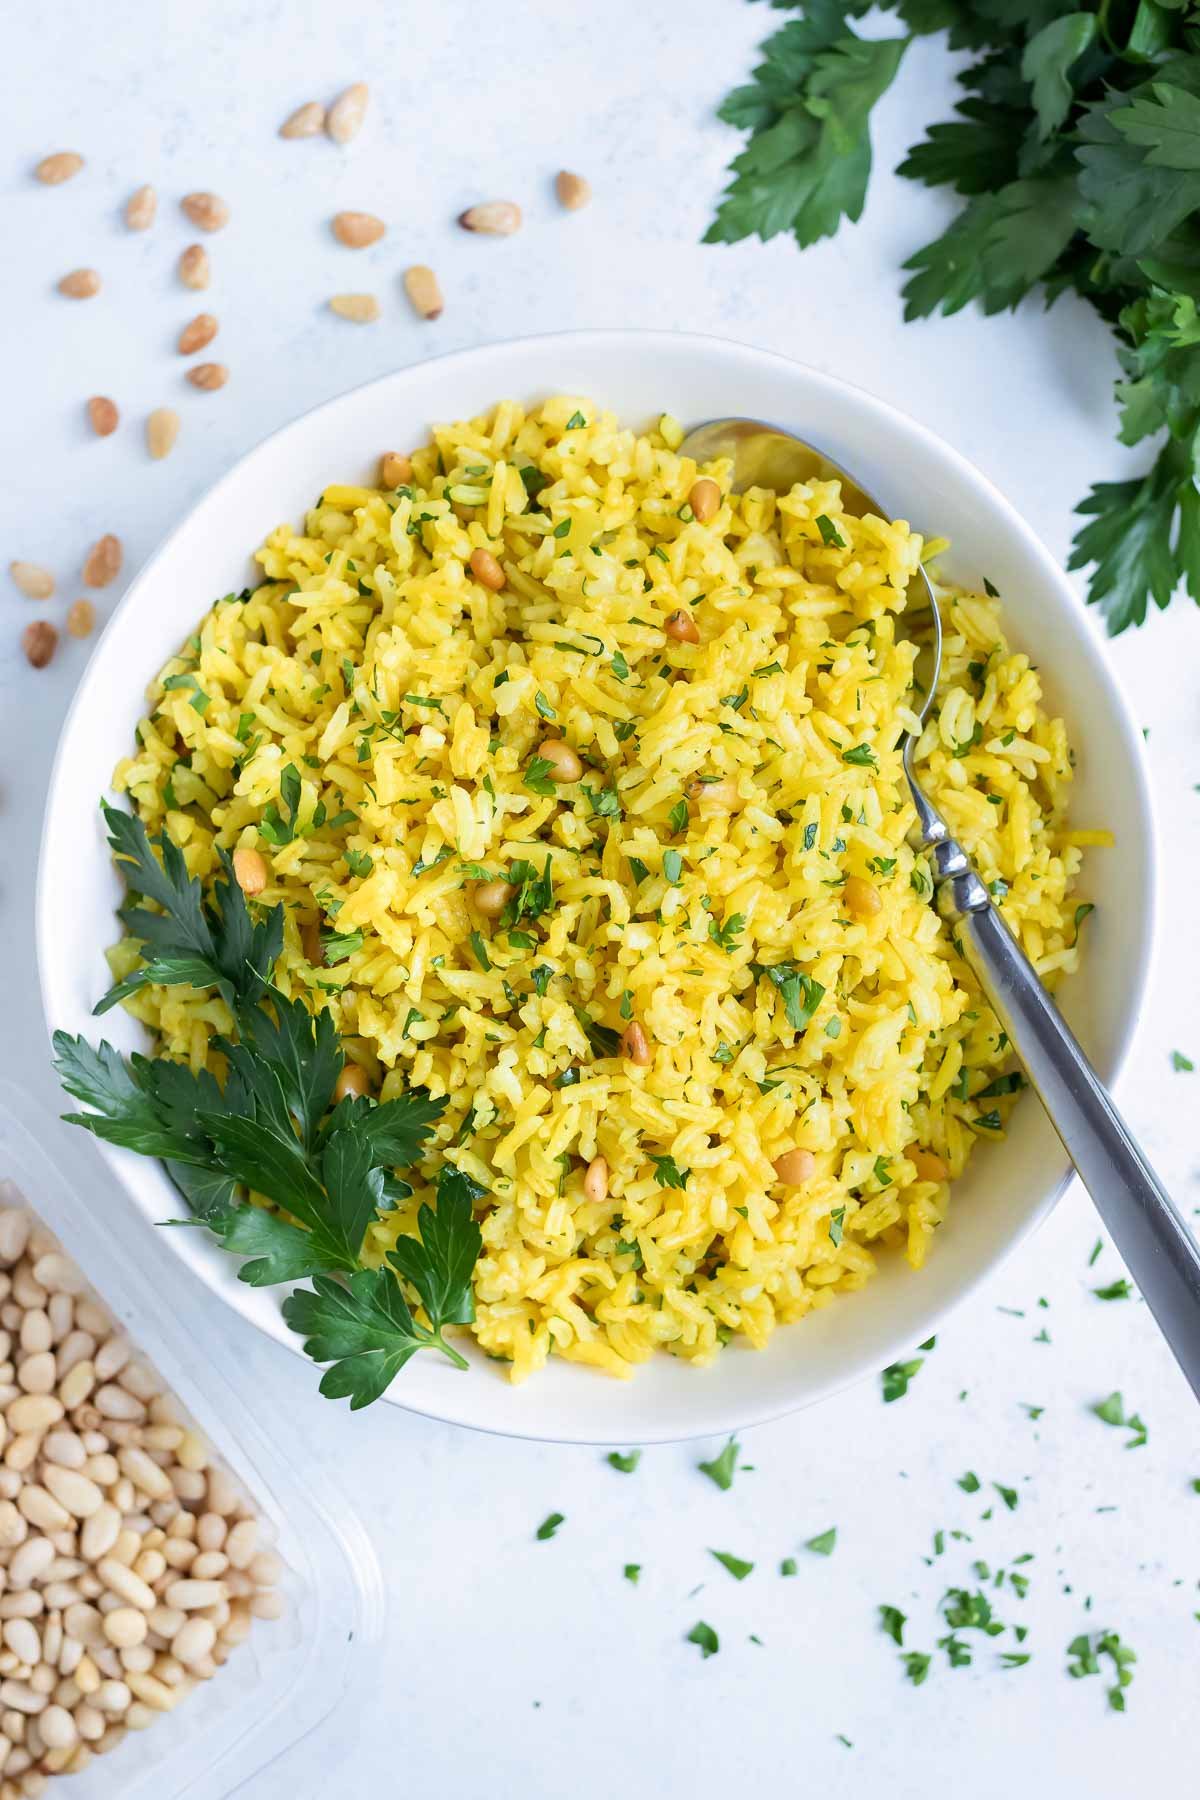 An overhead picture shows the yellow rice in a bowl.